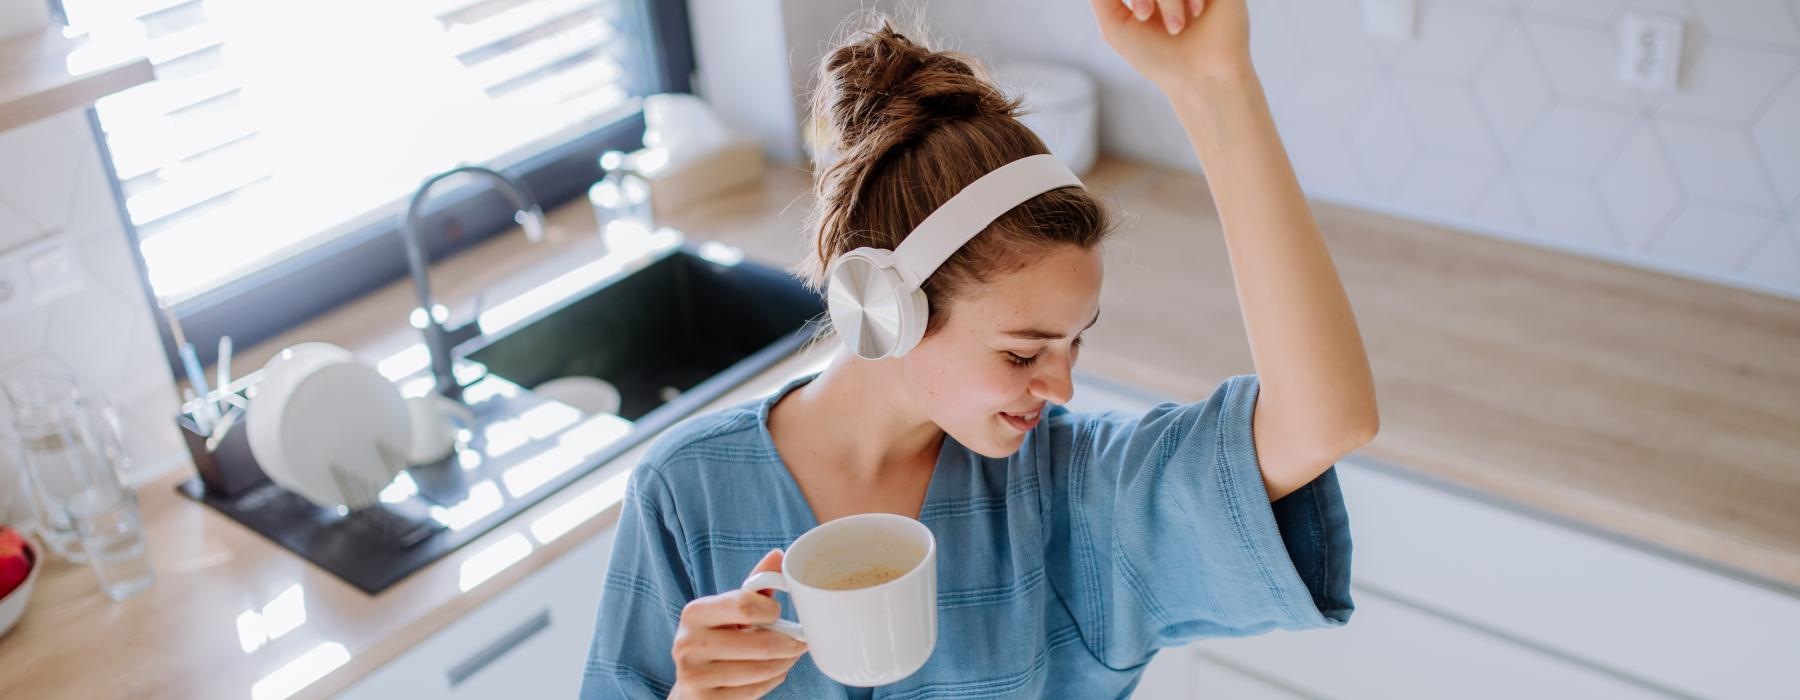 woman with headphones dances in her kitchen while holding a cup of coffee